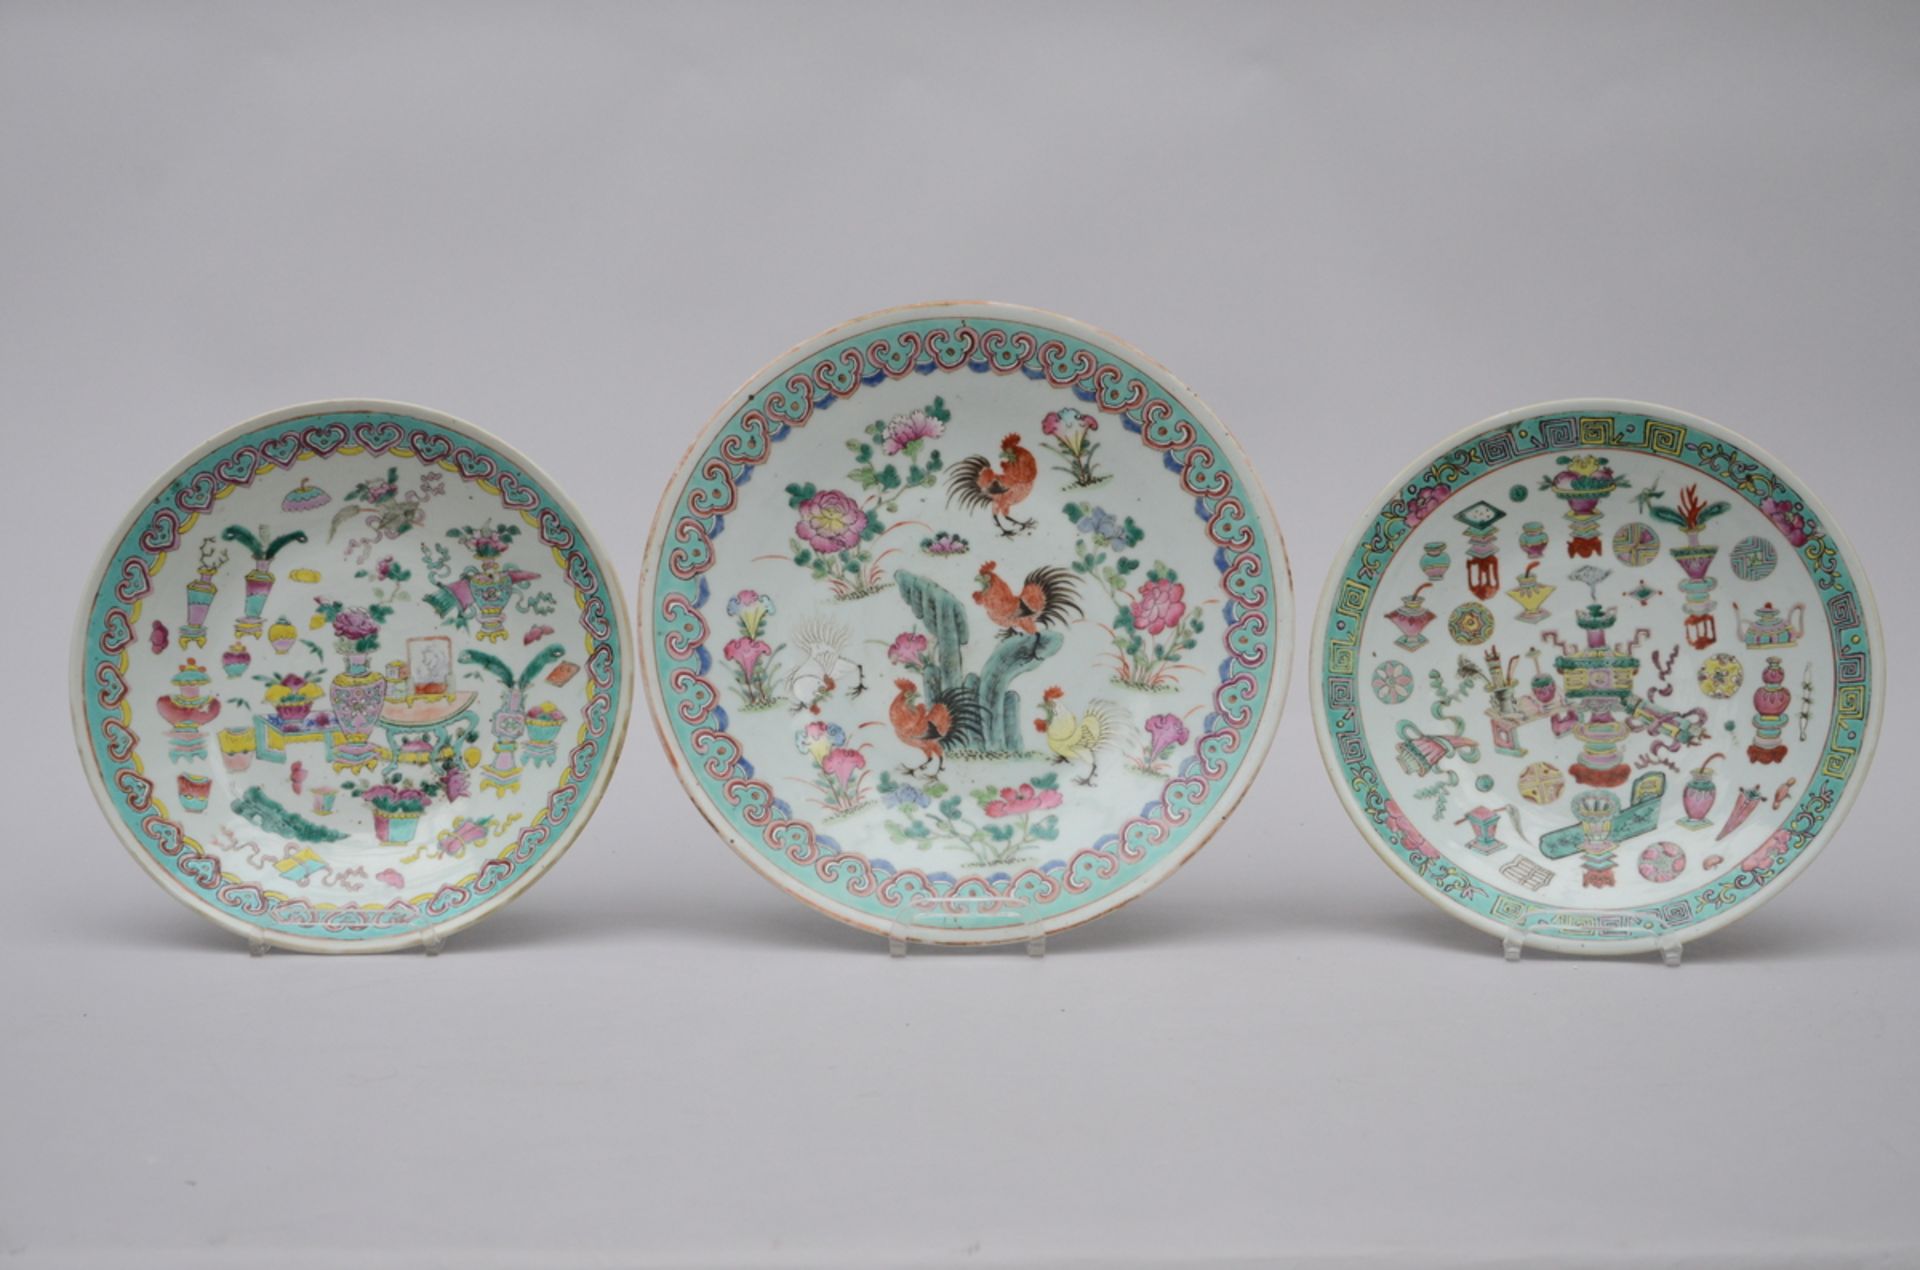 Three dishes in Chinese porcelain 'antiquities' (29 - 34cm)